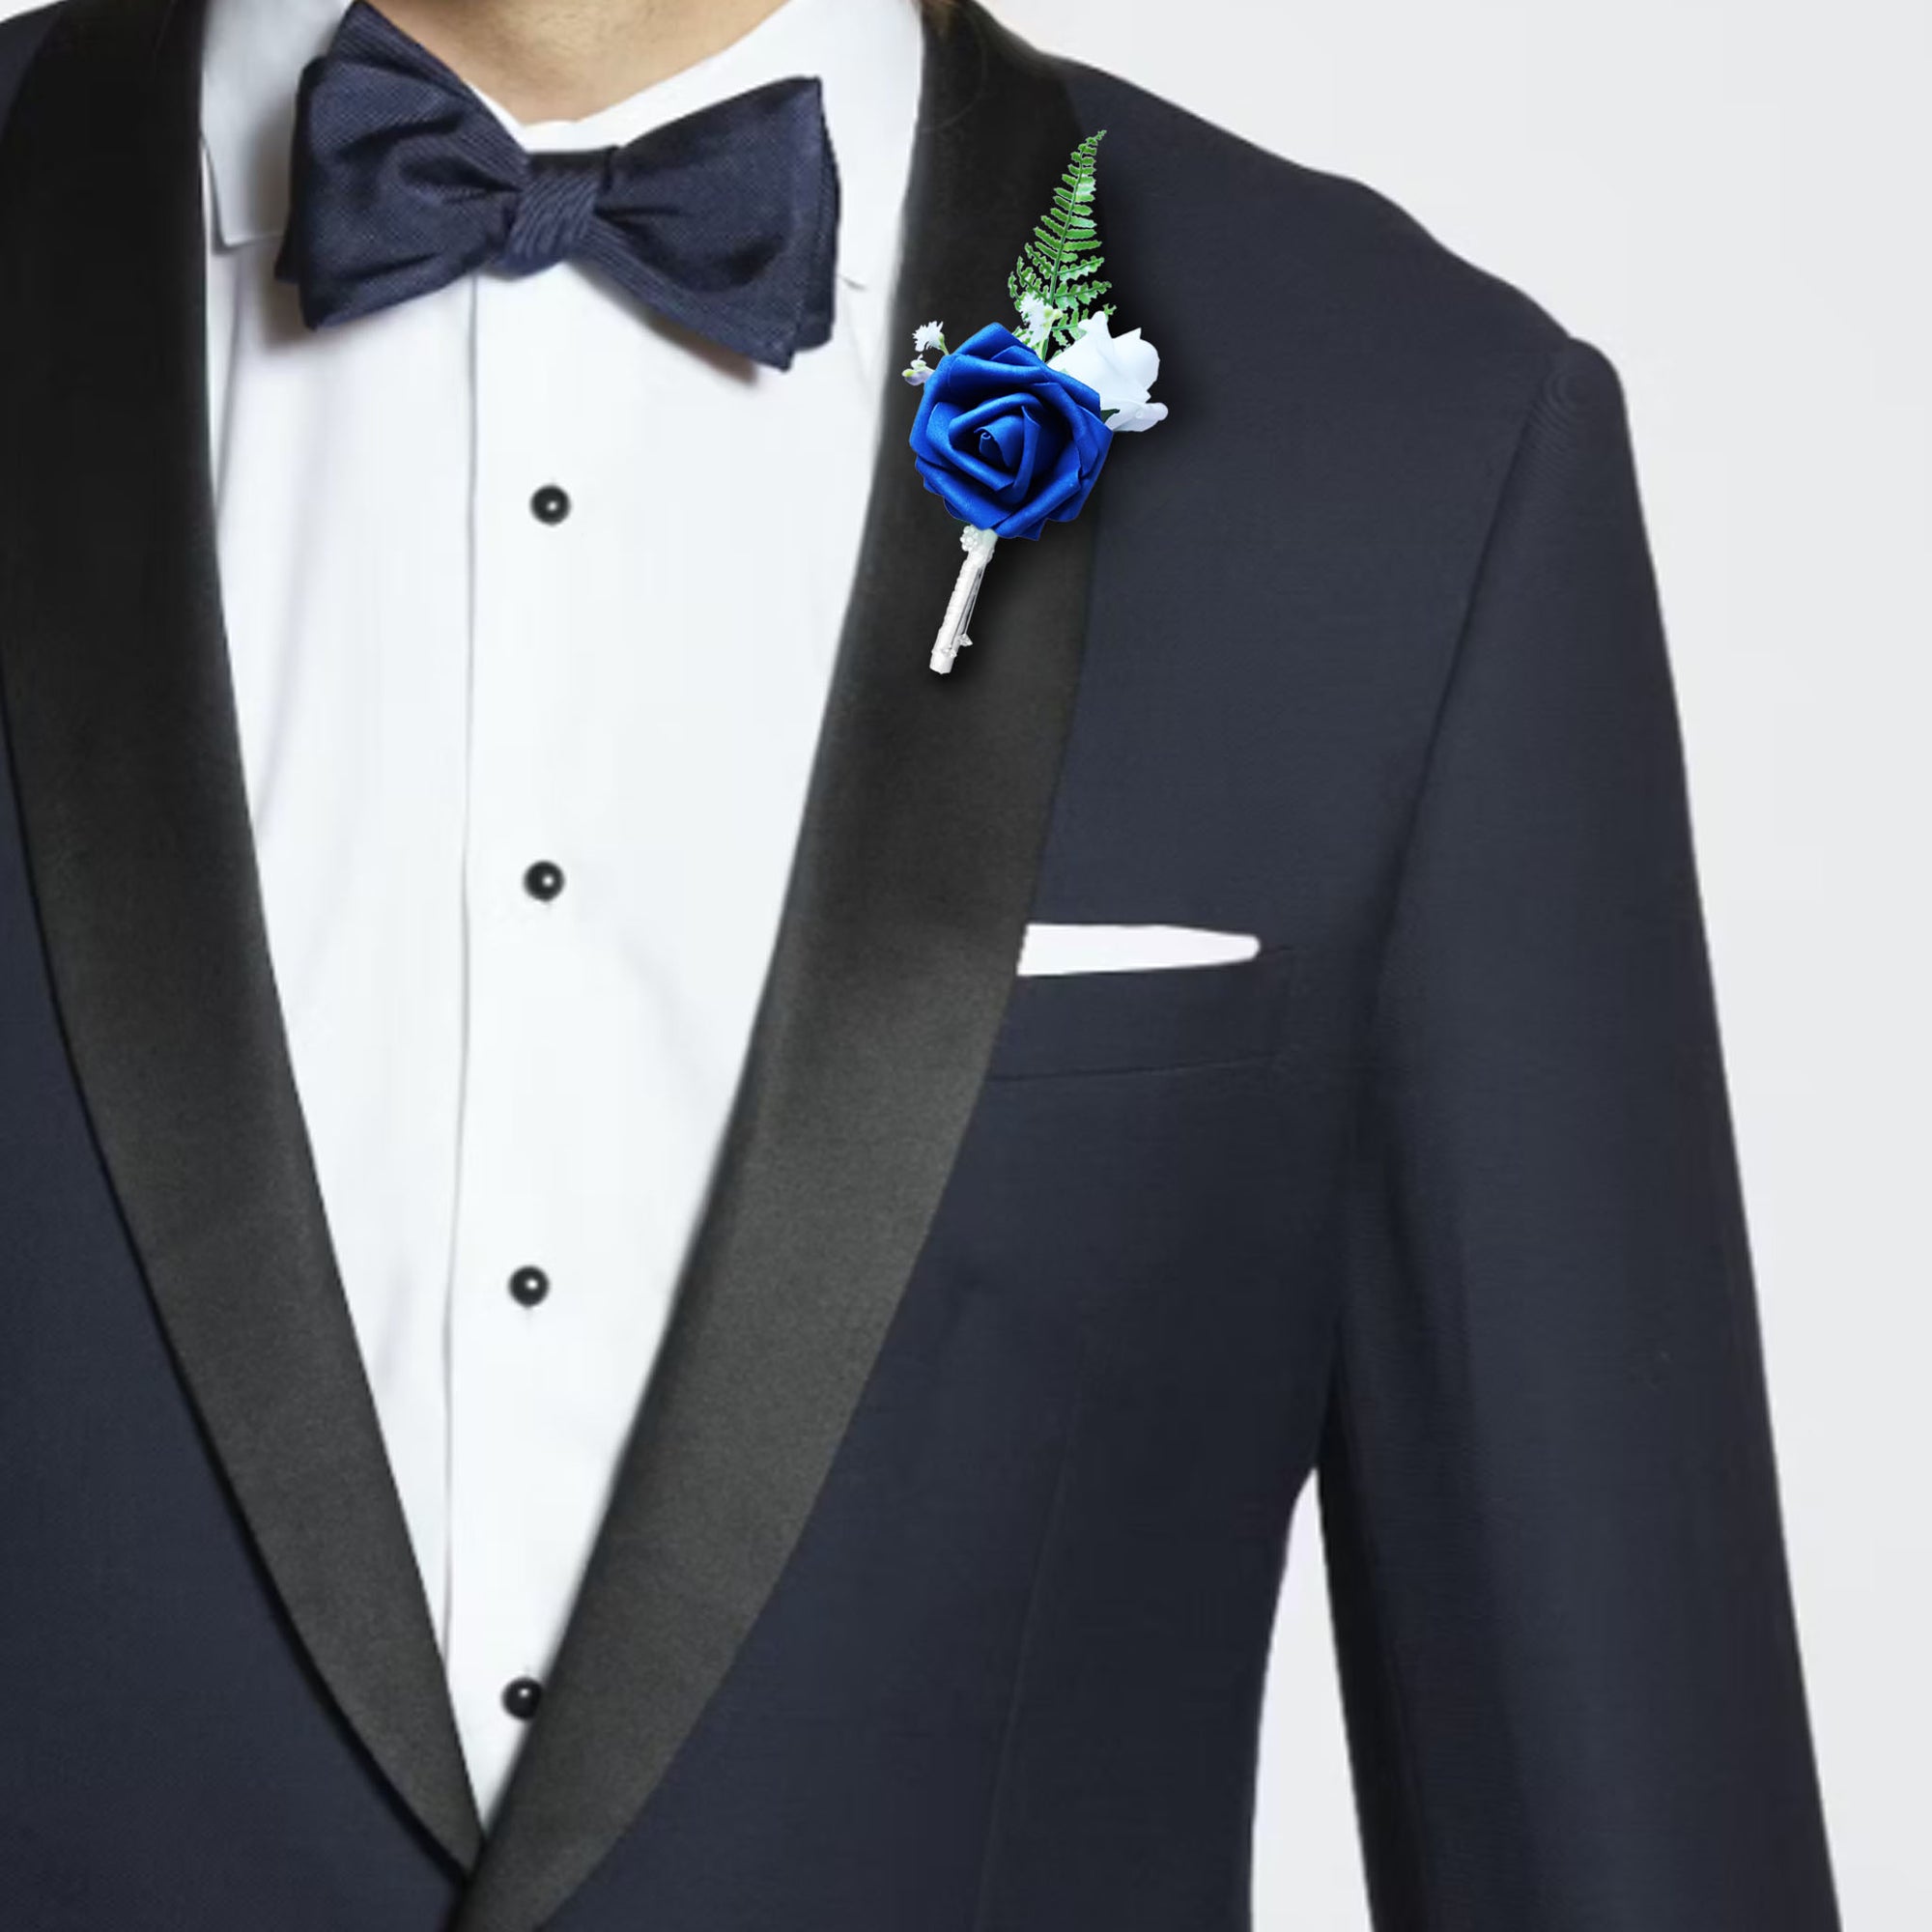 Royal Blue Prom Corsage Best Man Boutonniere Fake Rose